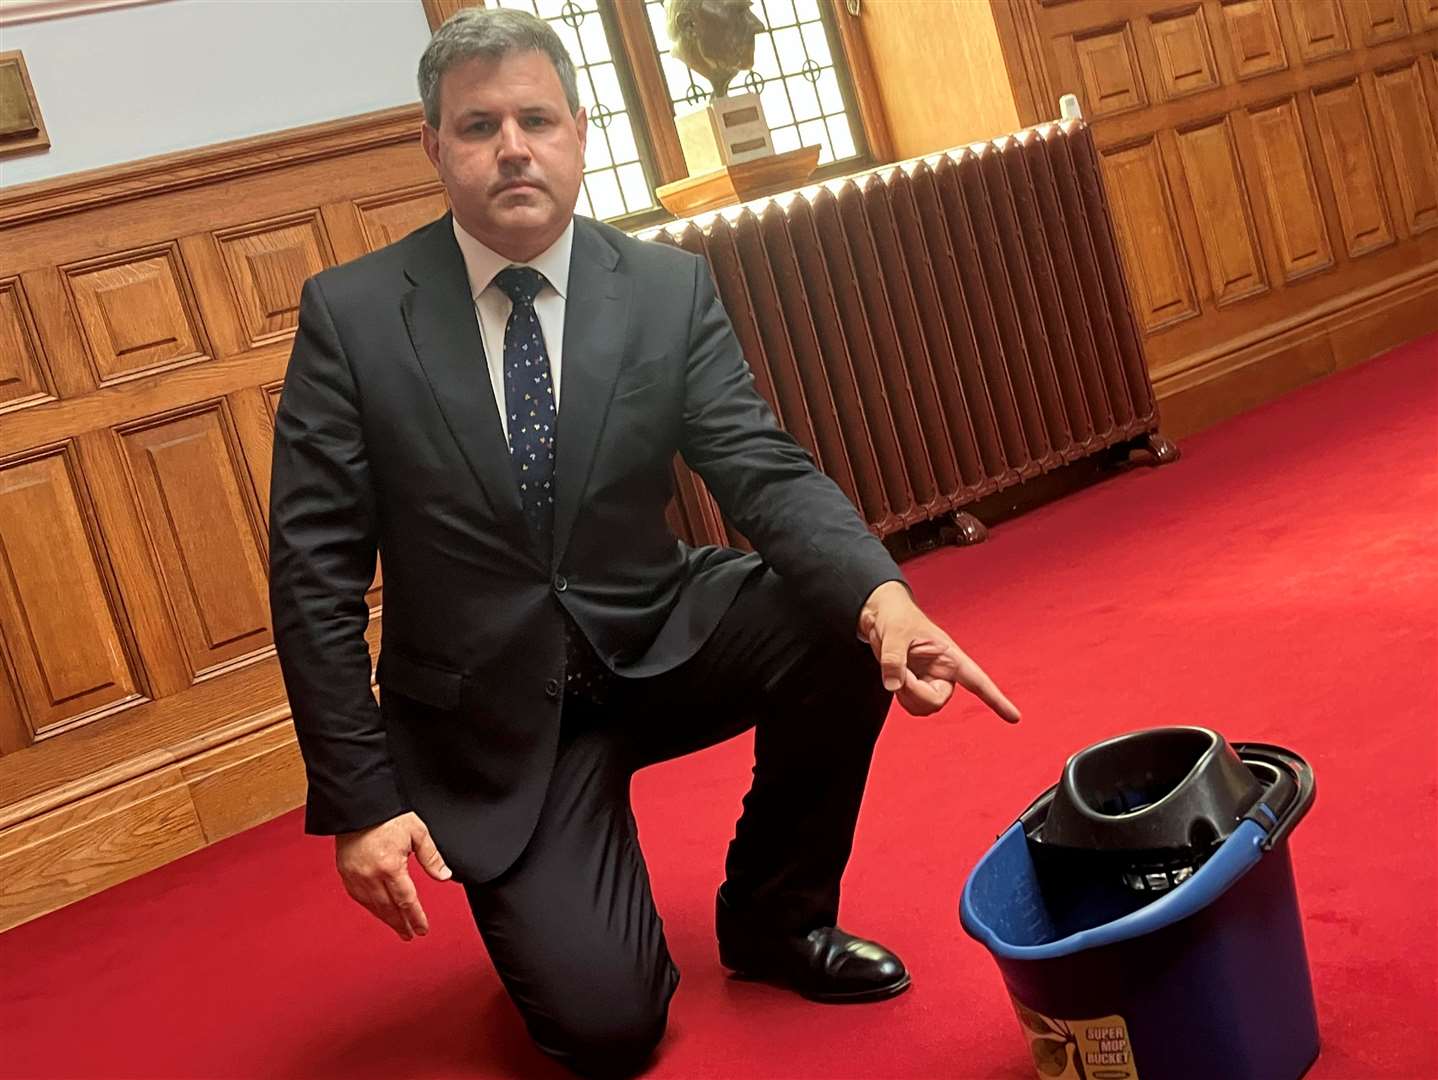 Lib Dem leader Cllr Antony Hook pointing to a bucket collecting water from the leaking roof at County Hall in Maidstone